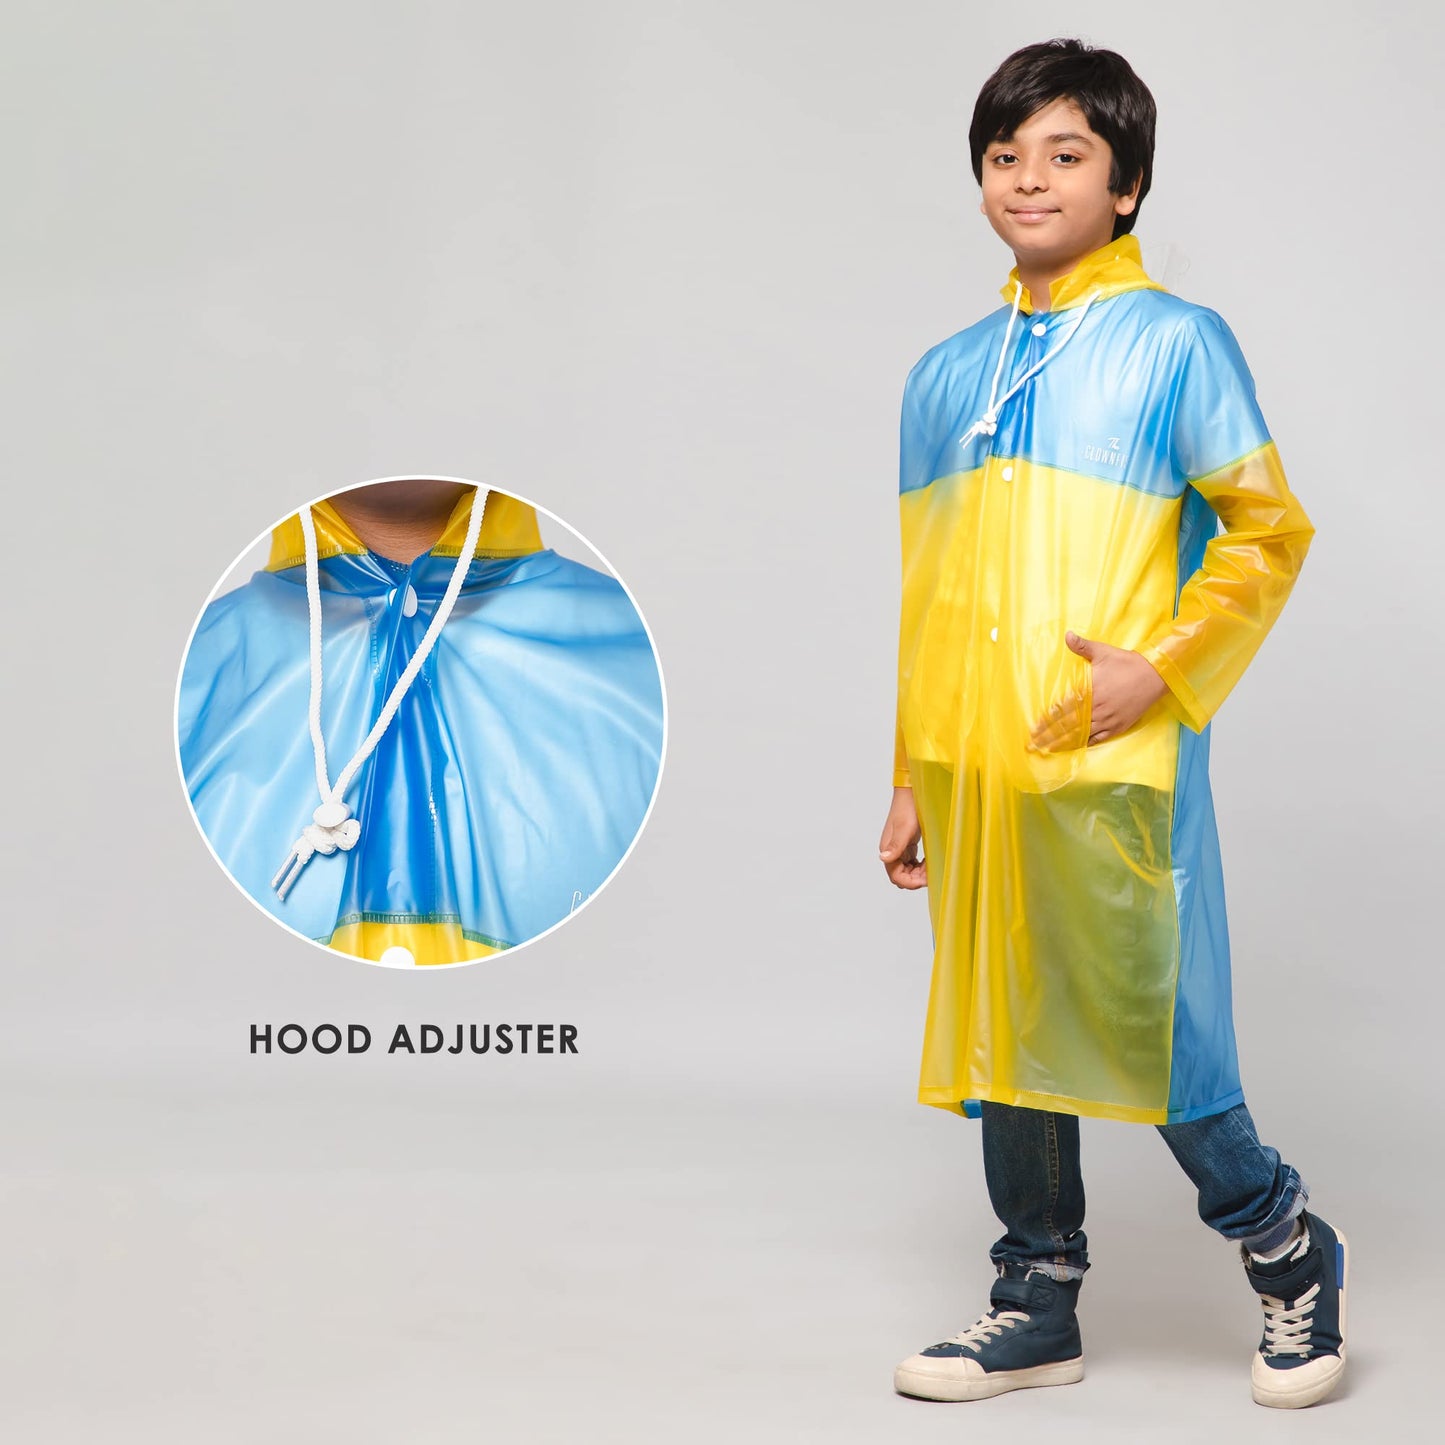 THE CLOWNFISH Puddle Jumper Series Unisex Kids Waterproof Single Layer PVC Longcoat/Raincoat with Adjustable Hood. Age-3-4 Years (Fluoroscent Pink)